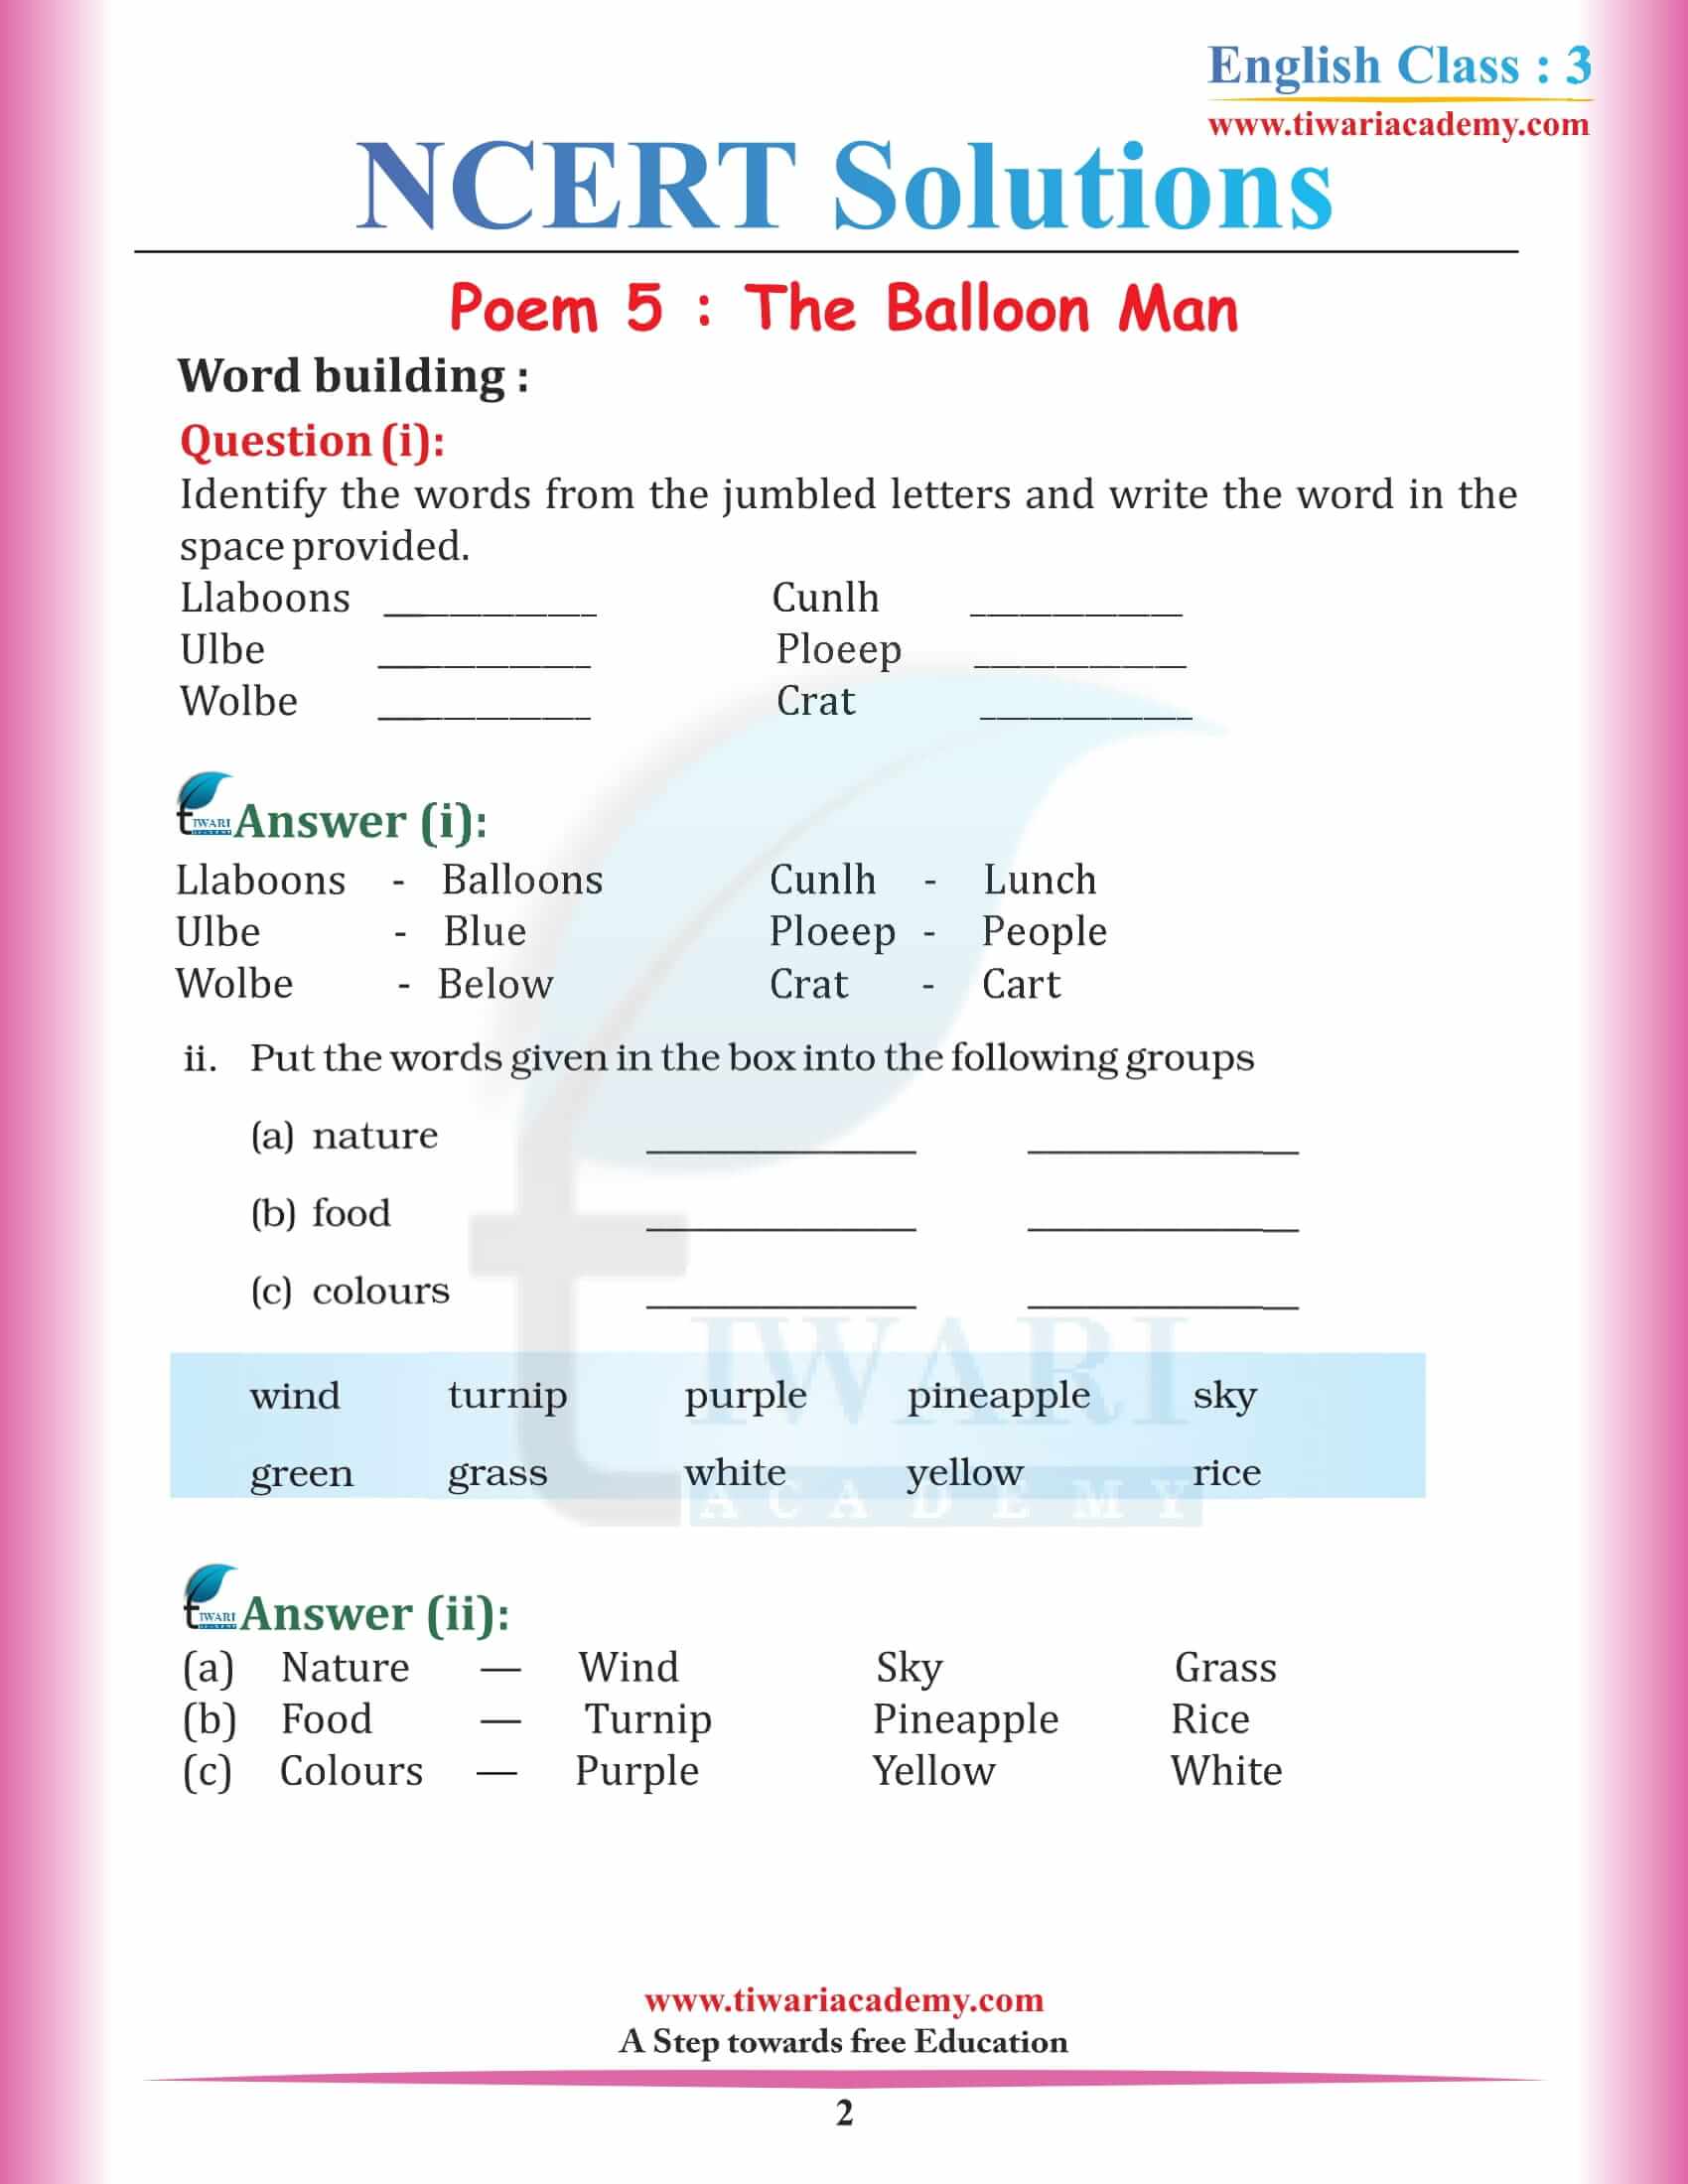 NCERT Solutions for Class 3 English Marigold 3 Unit 5 The Balloon Man